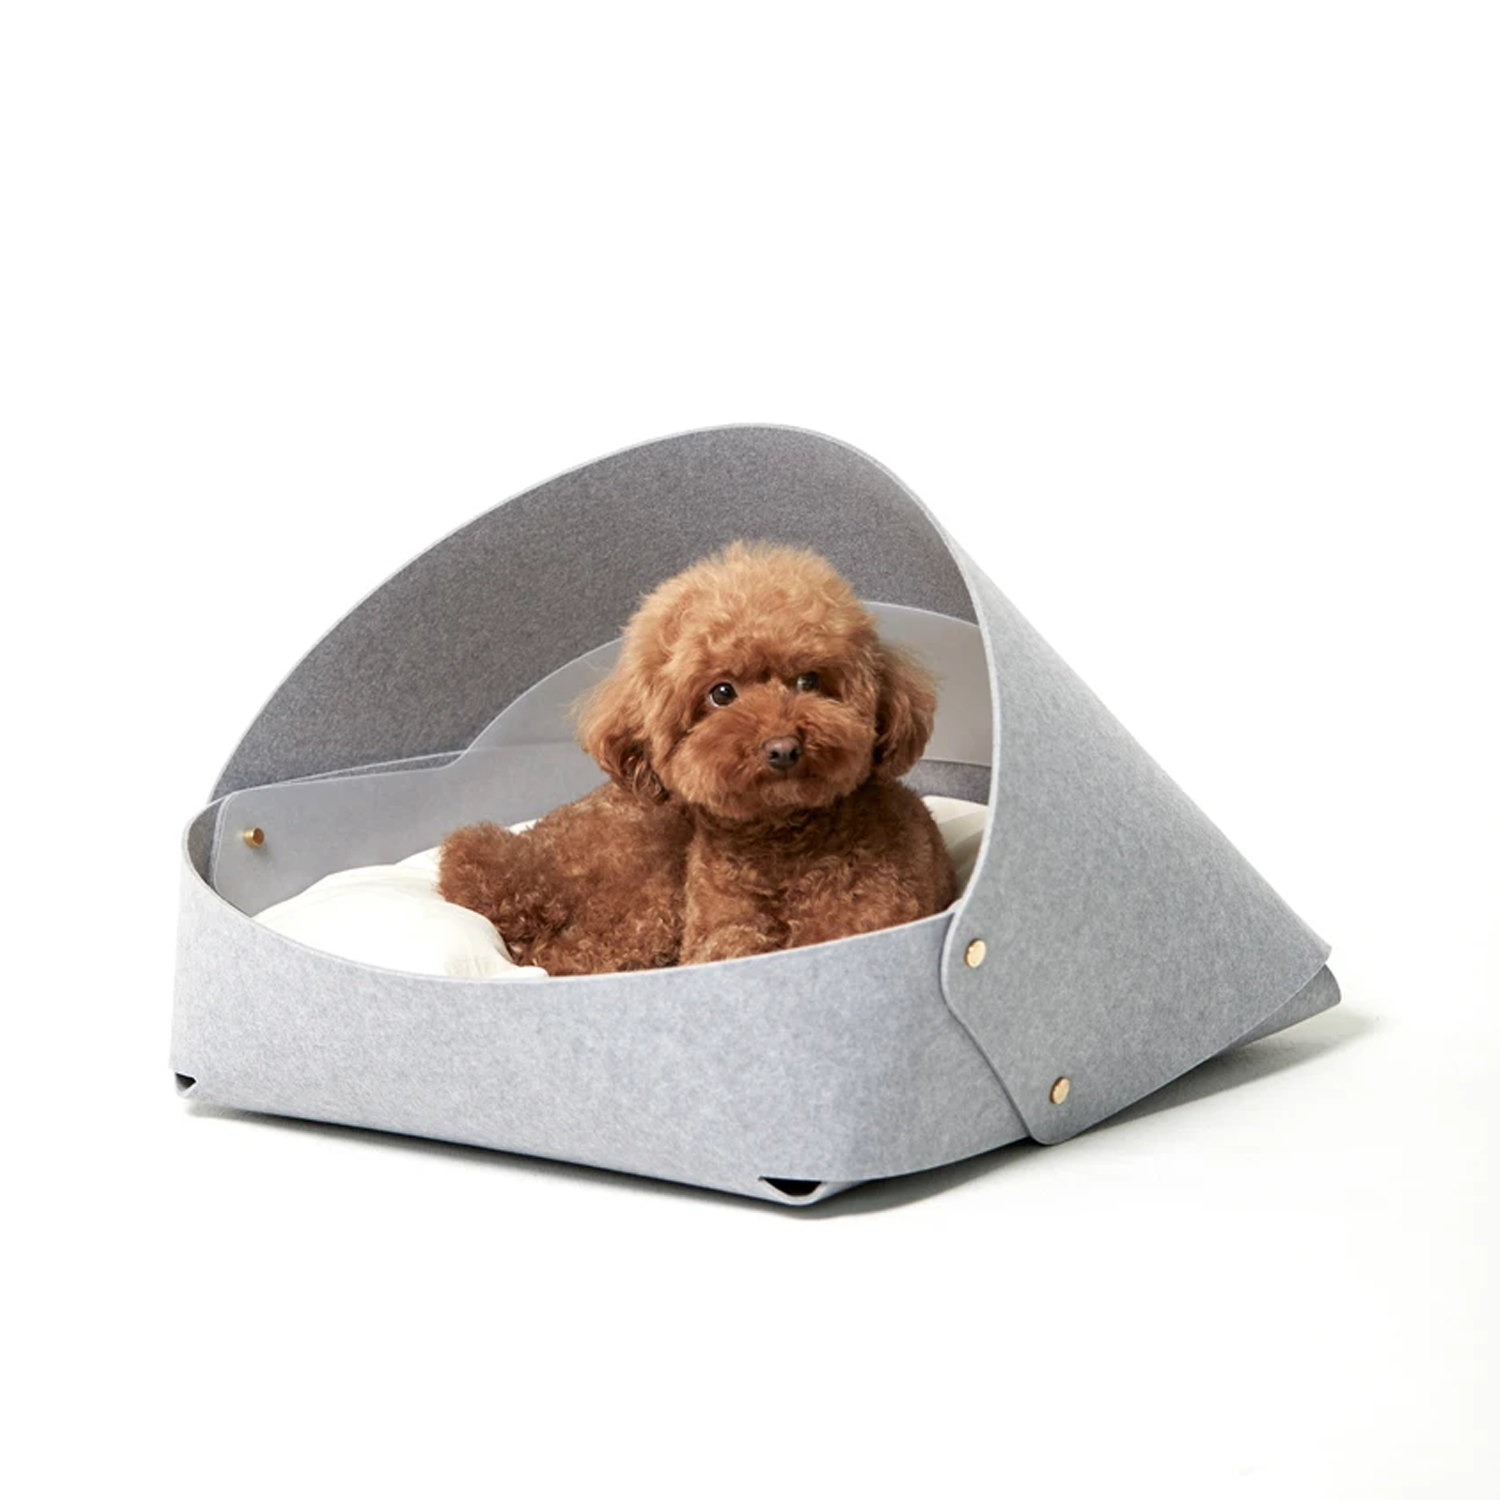 Pet Boutique - Dog Beds - Grey Marron Dog Bed by Pets So Good